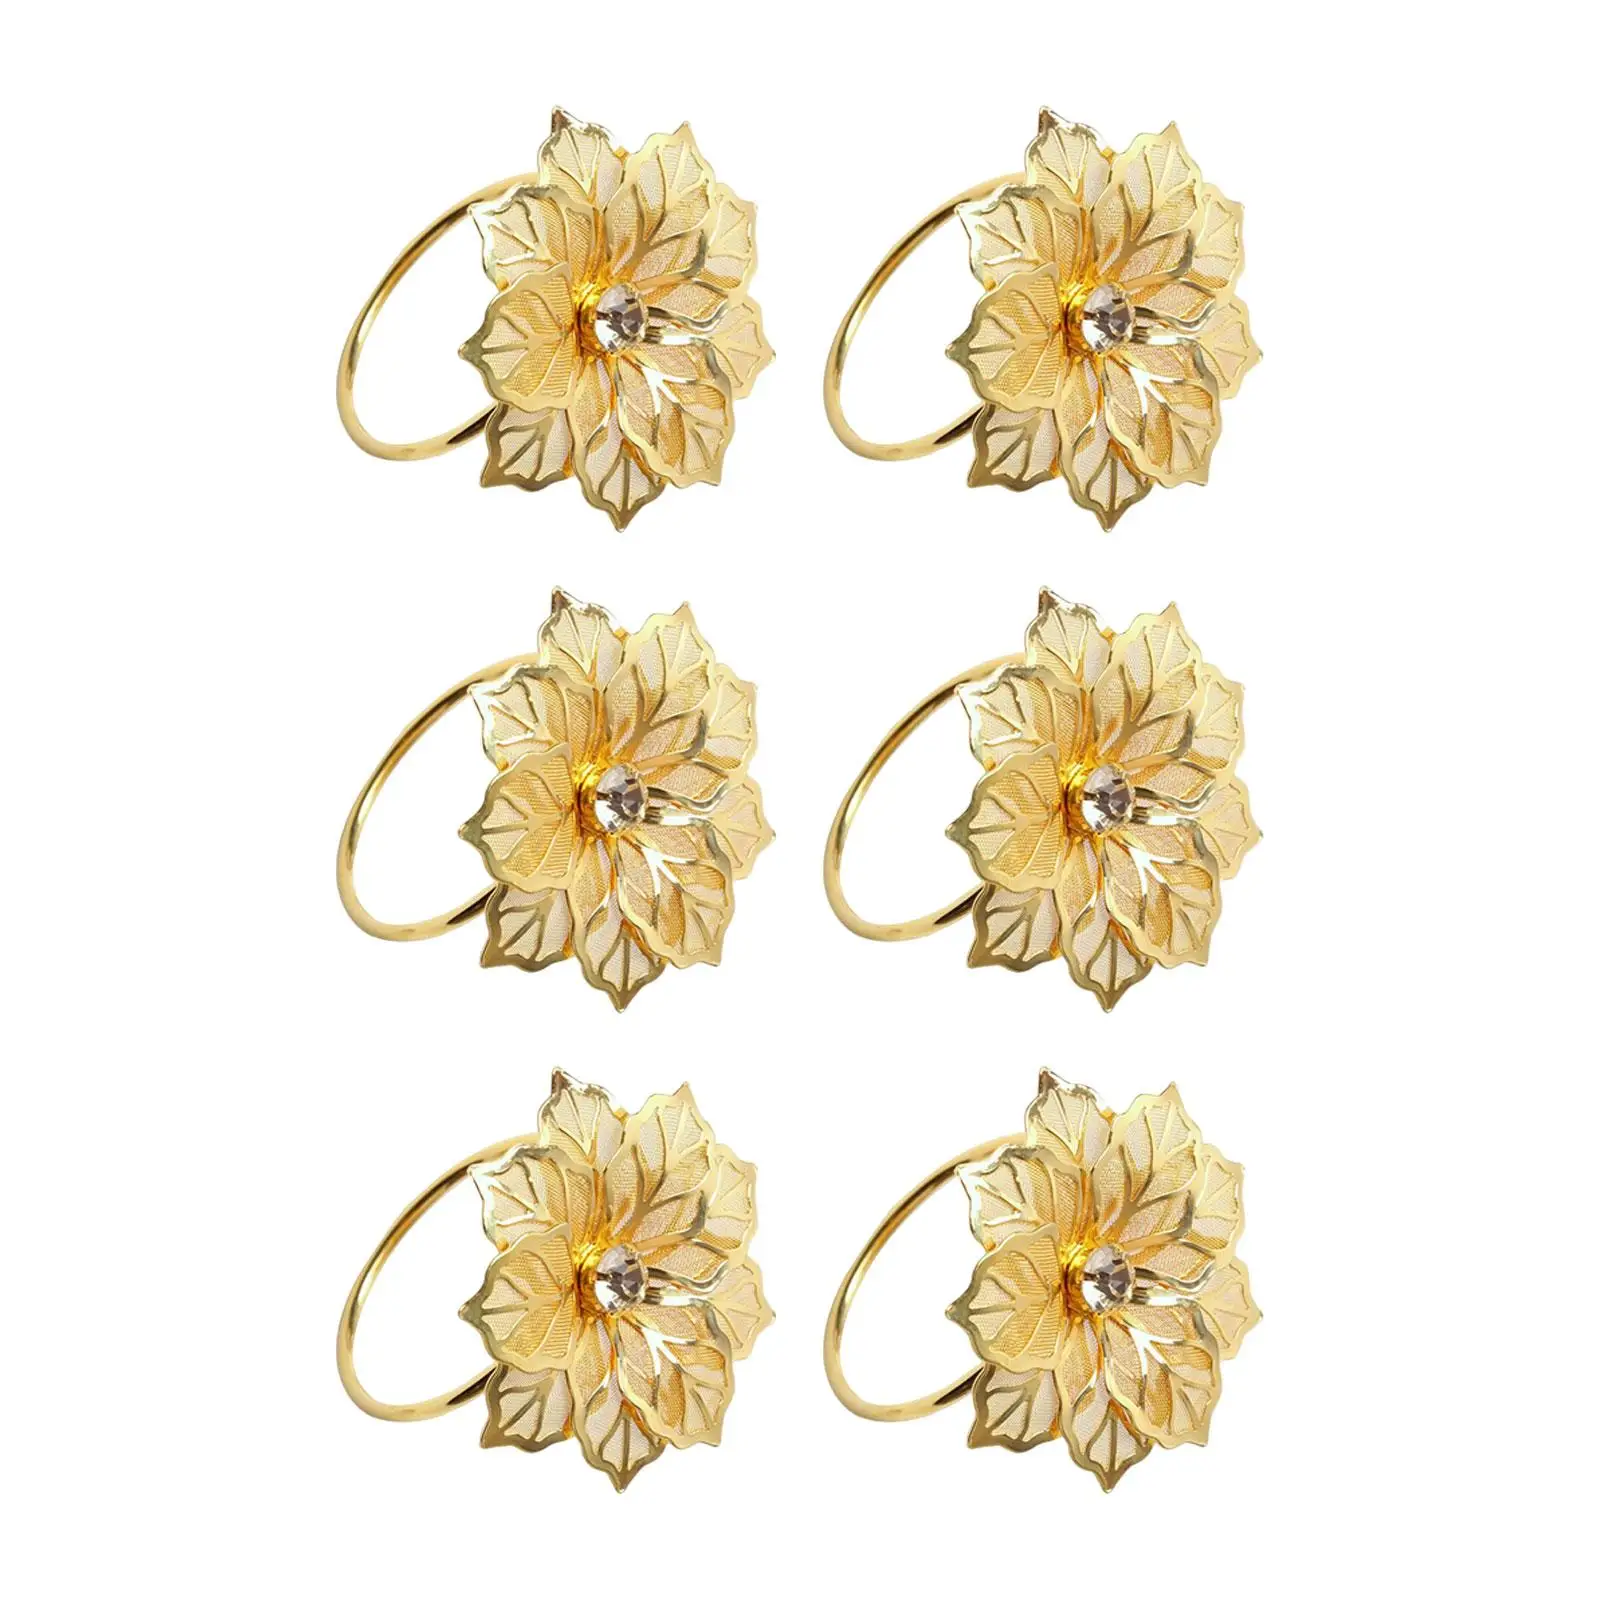 6Pcs Flowers Napkin Rings Decoration Floral Crafts Rhinestone Serviette Buckles for Dining Birthday Hotel Thanksgiving Holiday